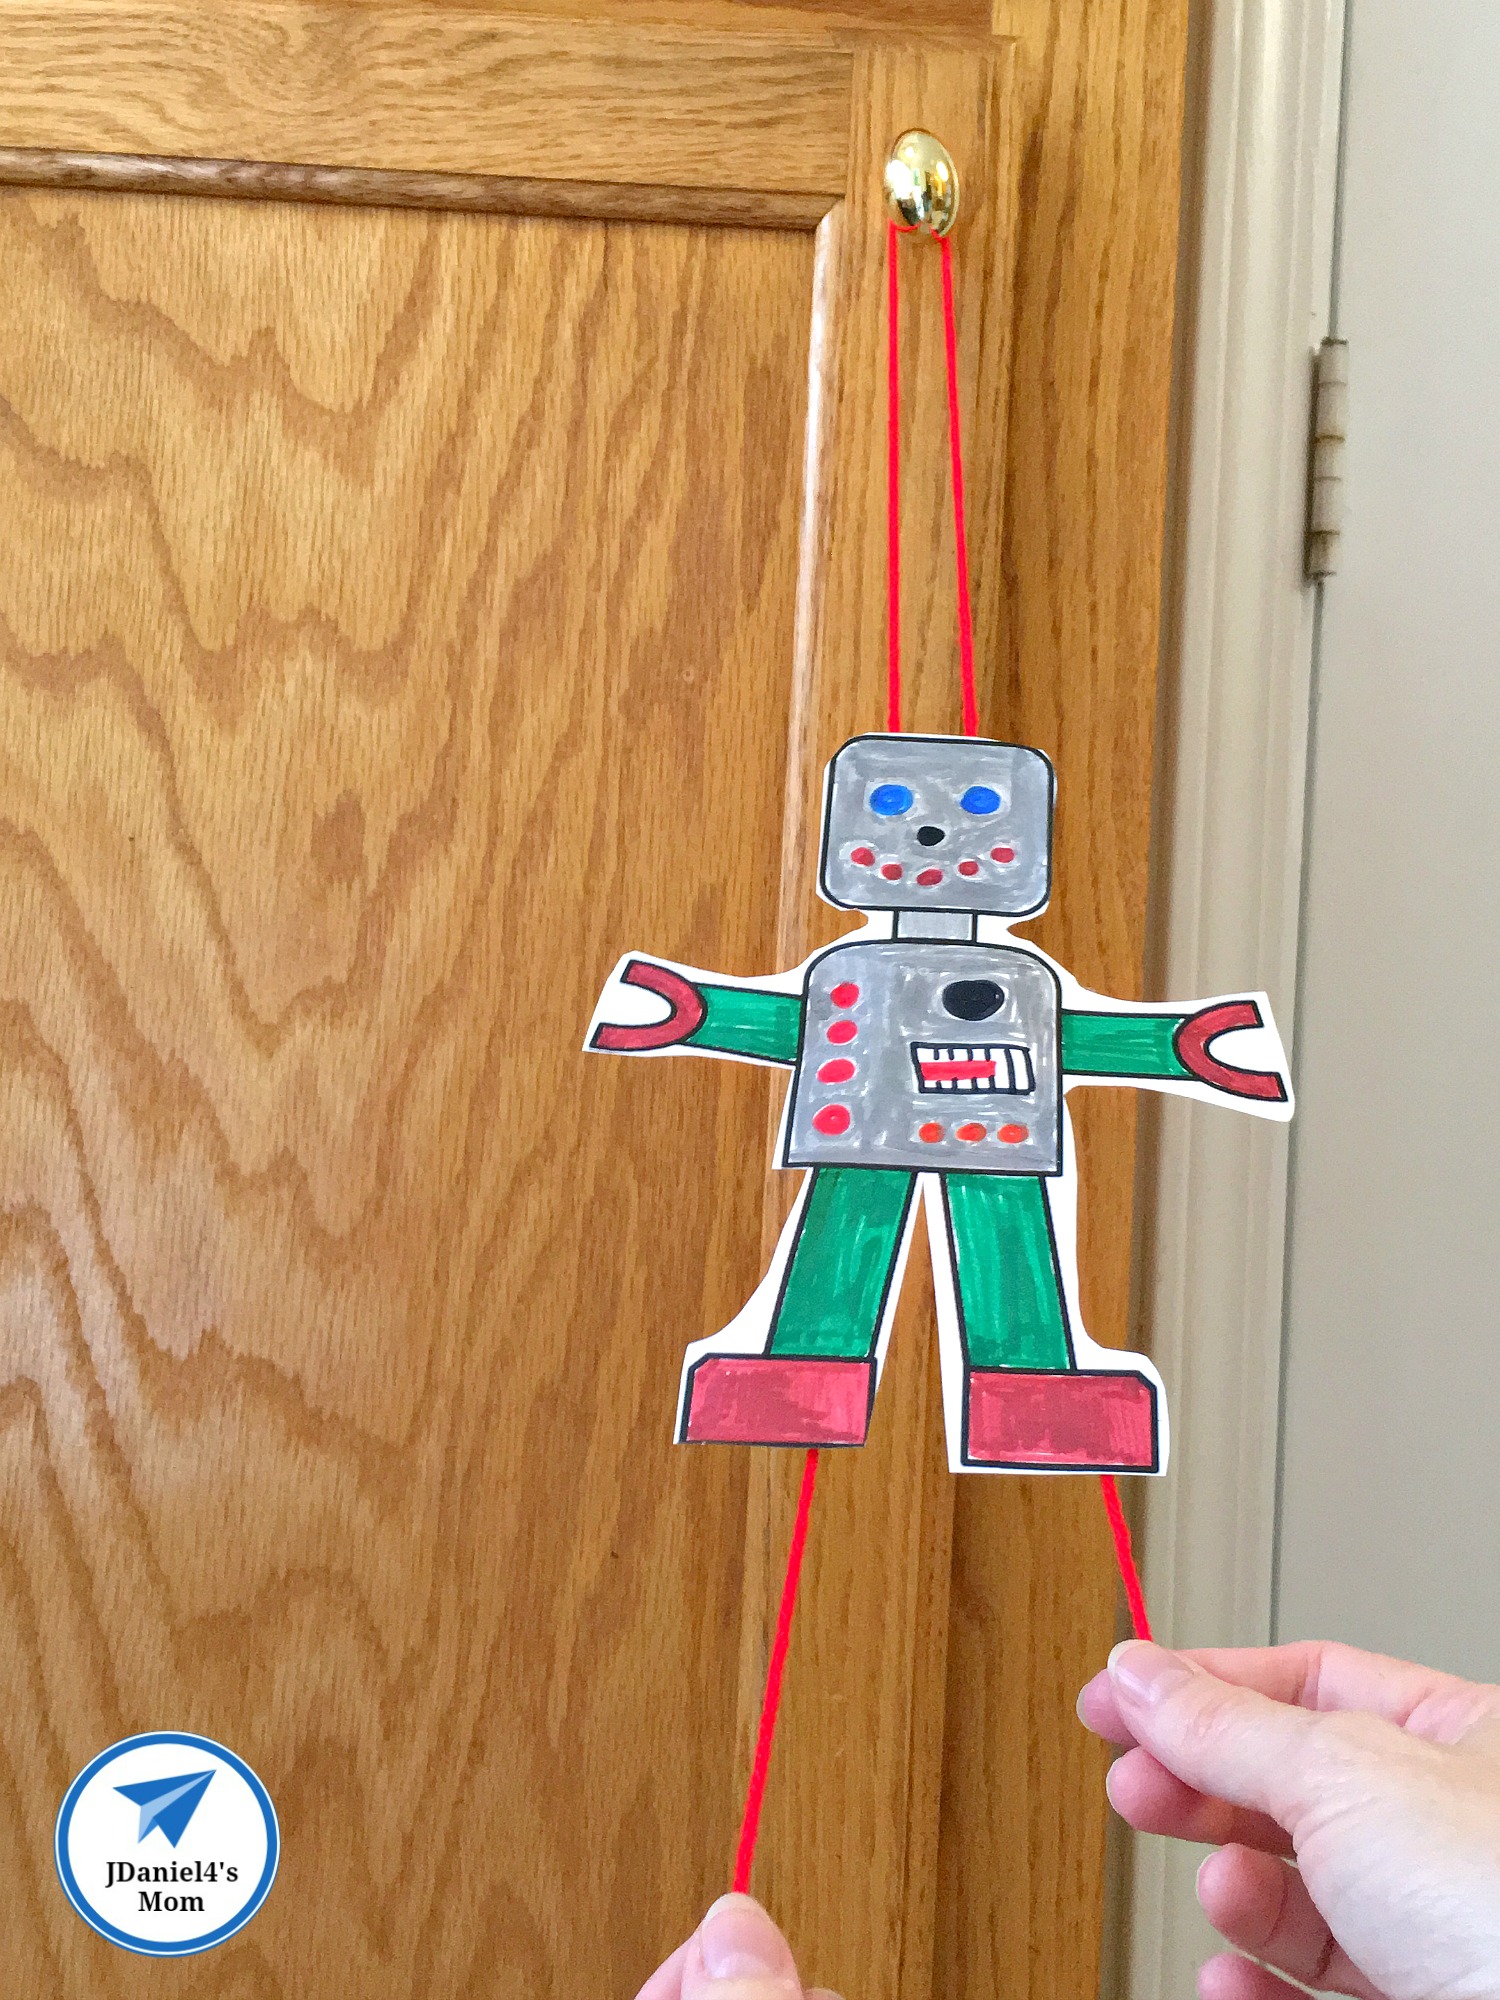 Flying Robot Printable STEAM Activity with Blockly Block Building Directions - Using Both Hands to Move the Robot